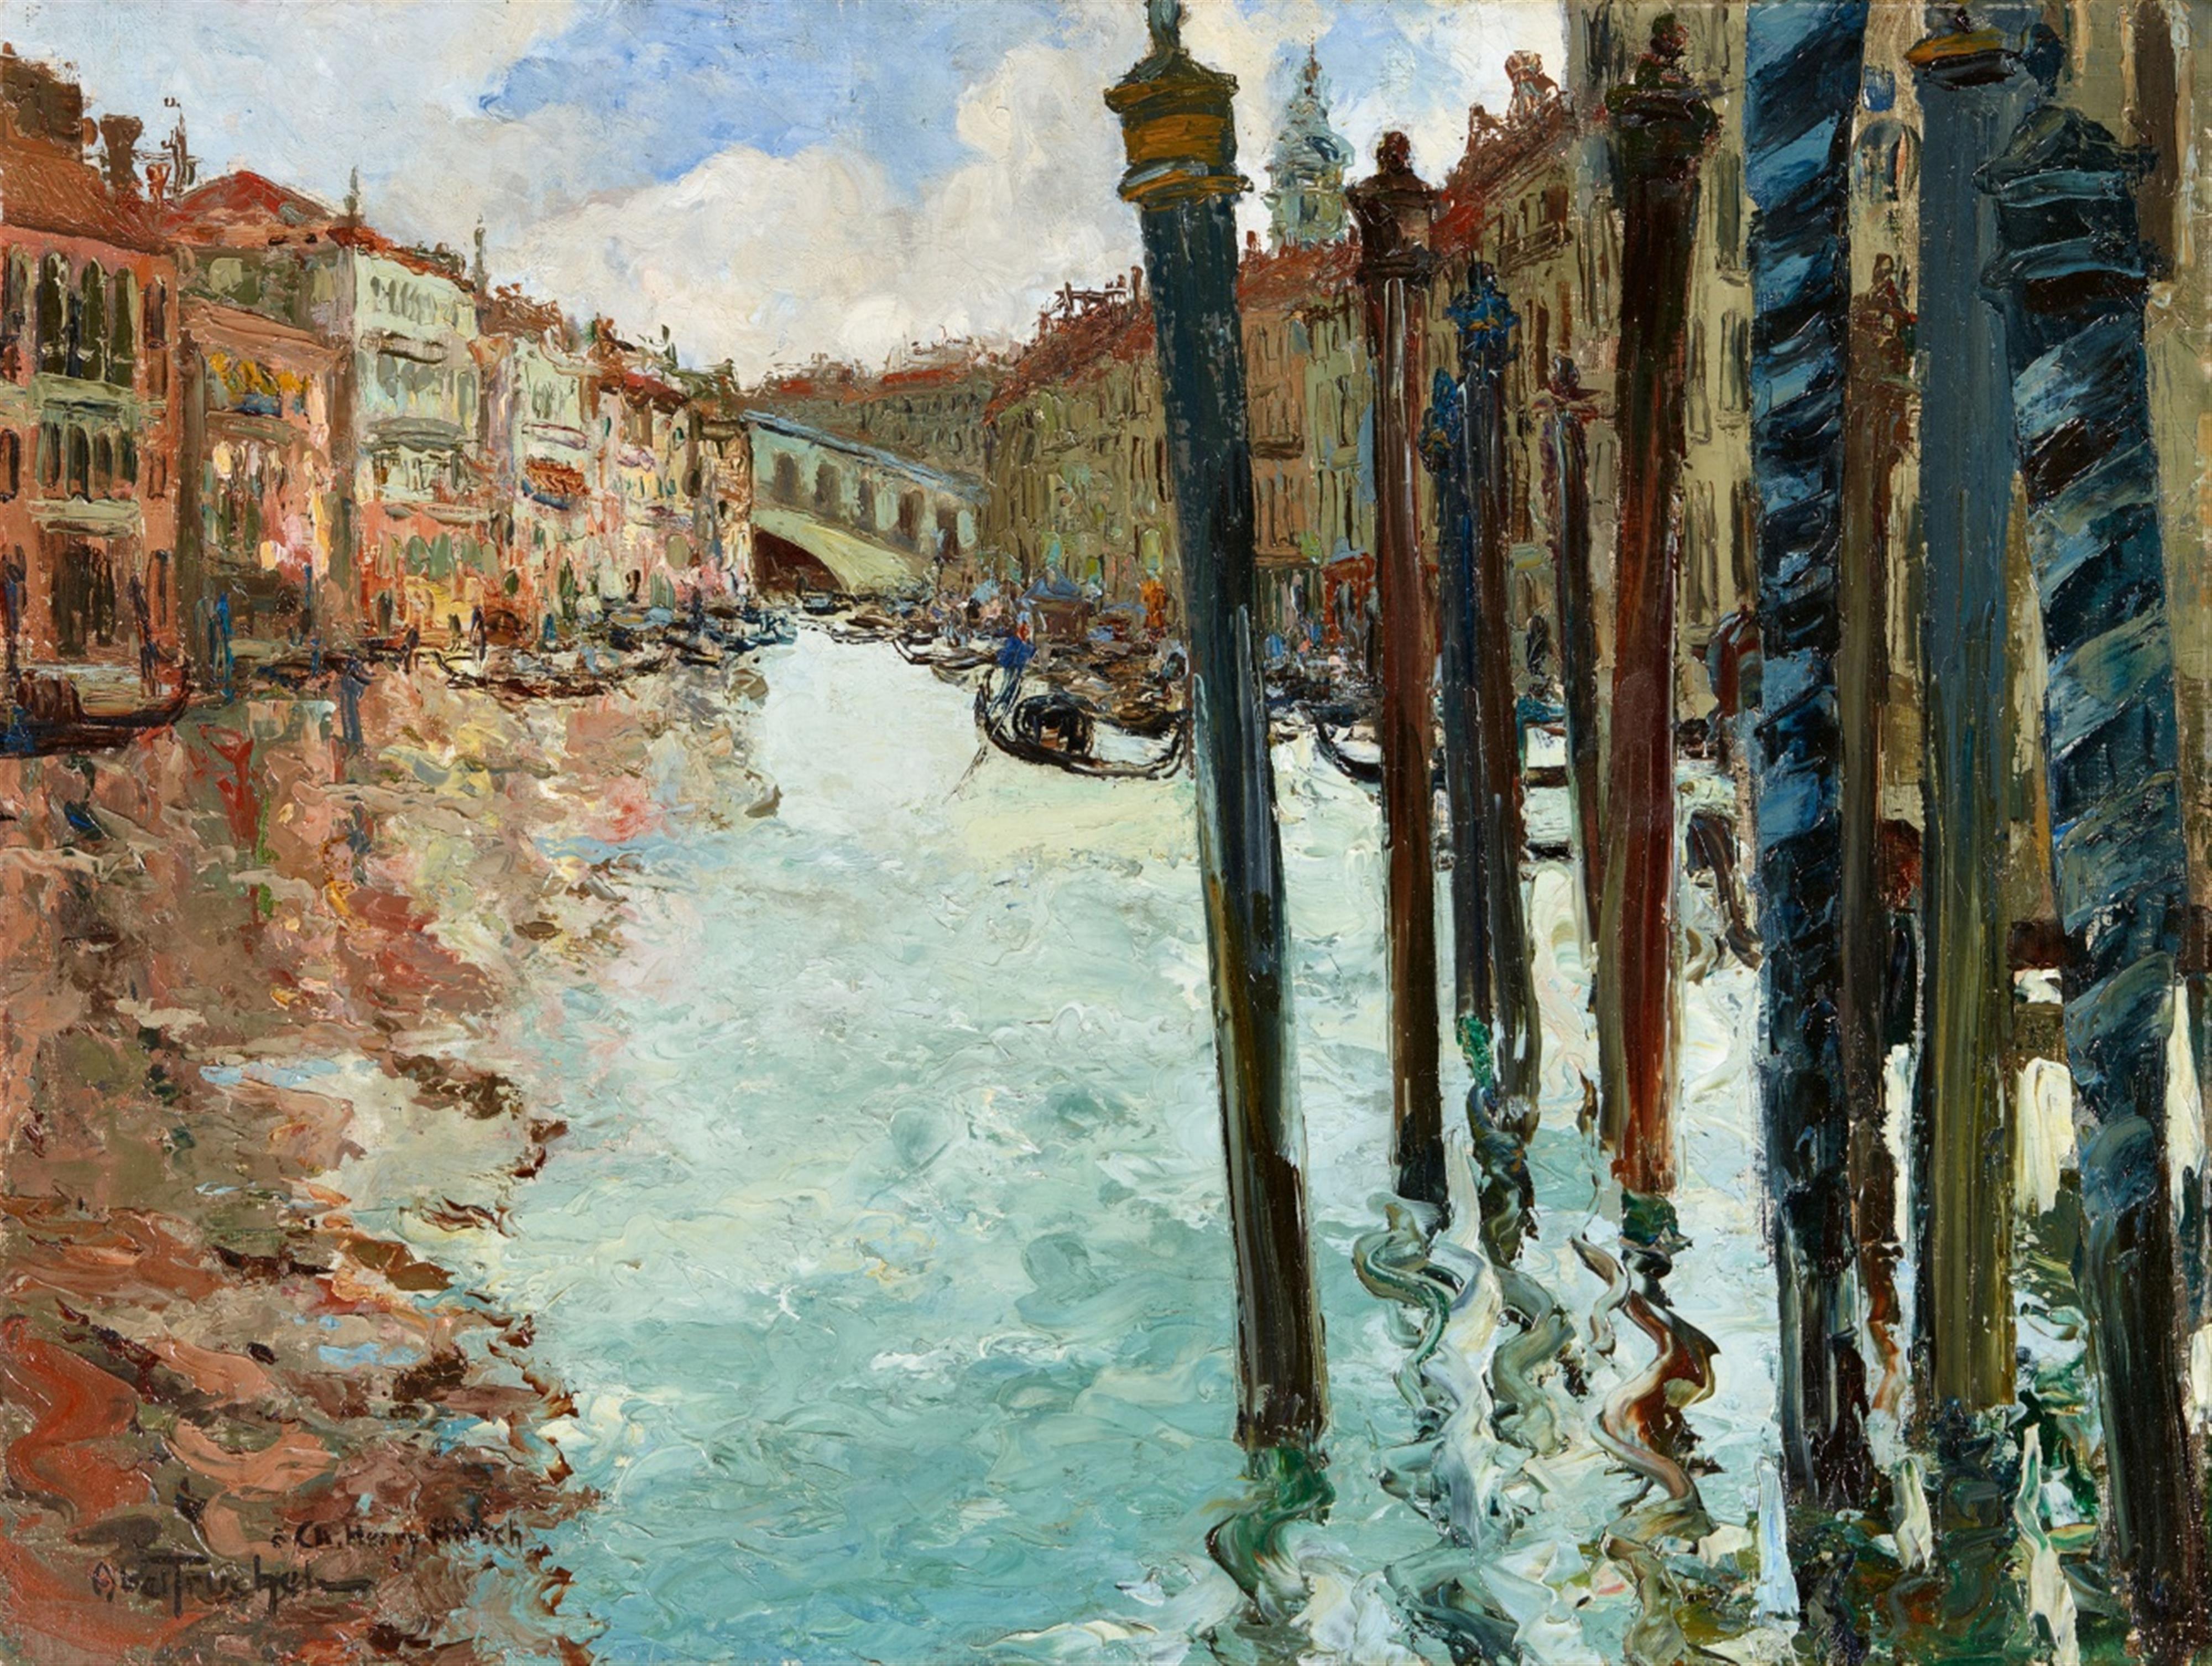 Abel-Truchet - View of the Grand Canal with the Rialto Bridge